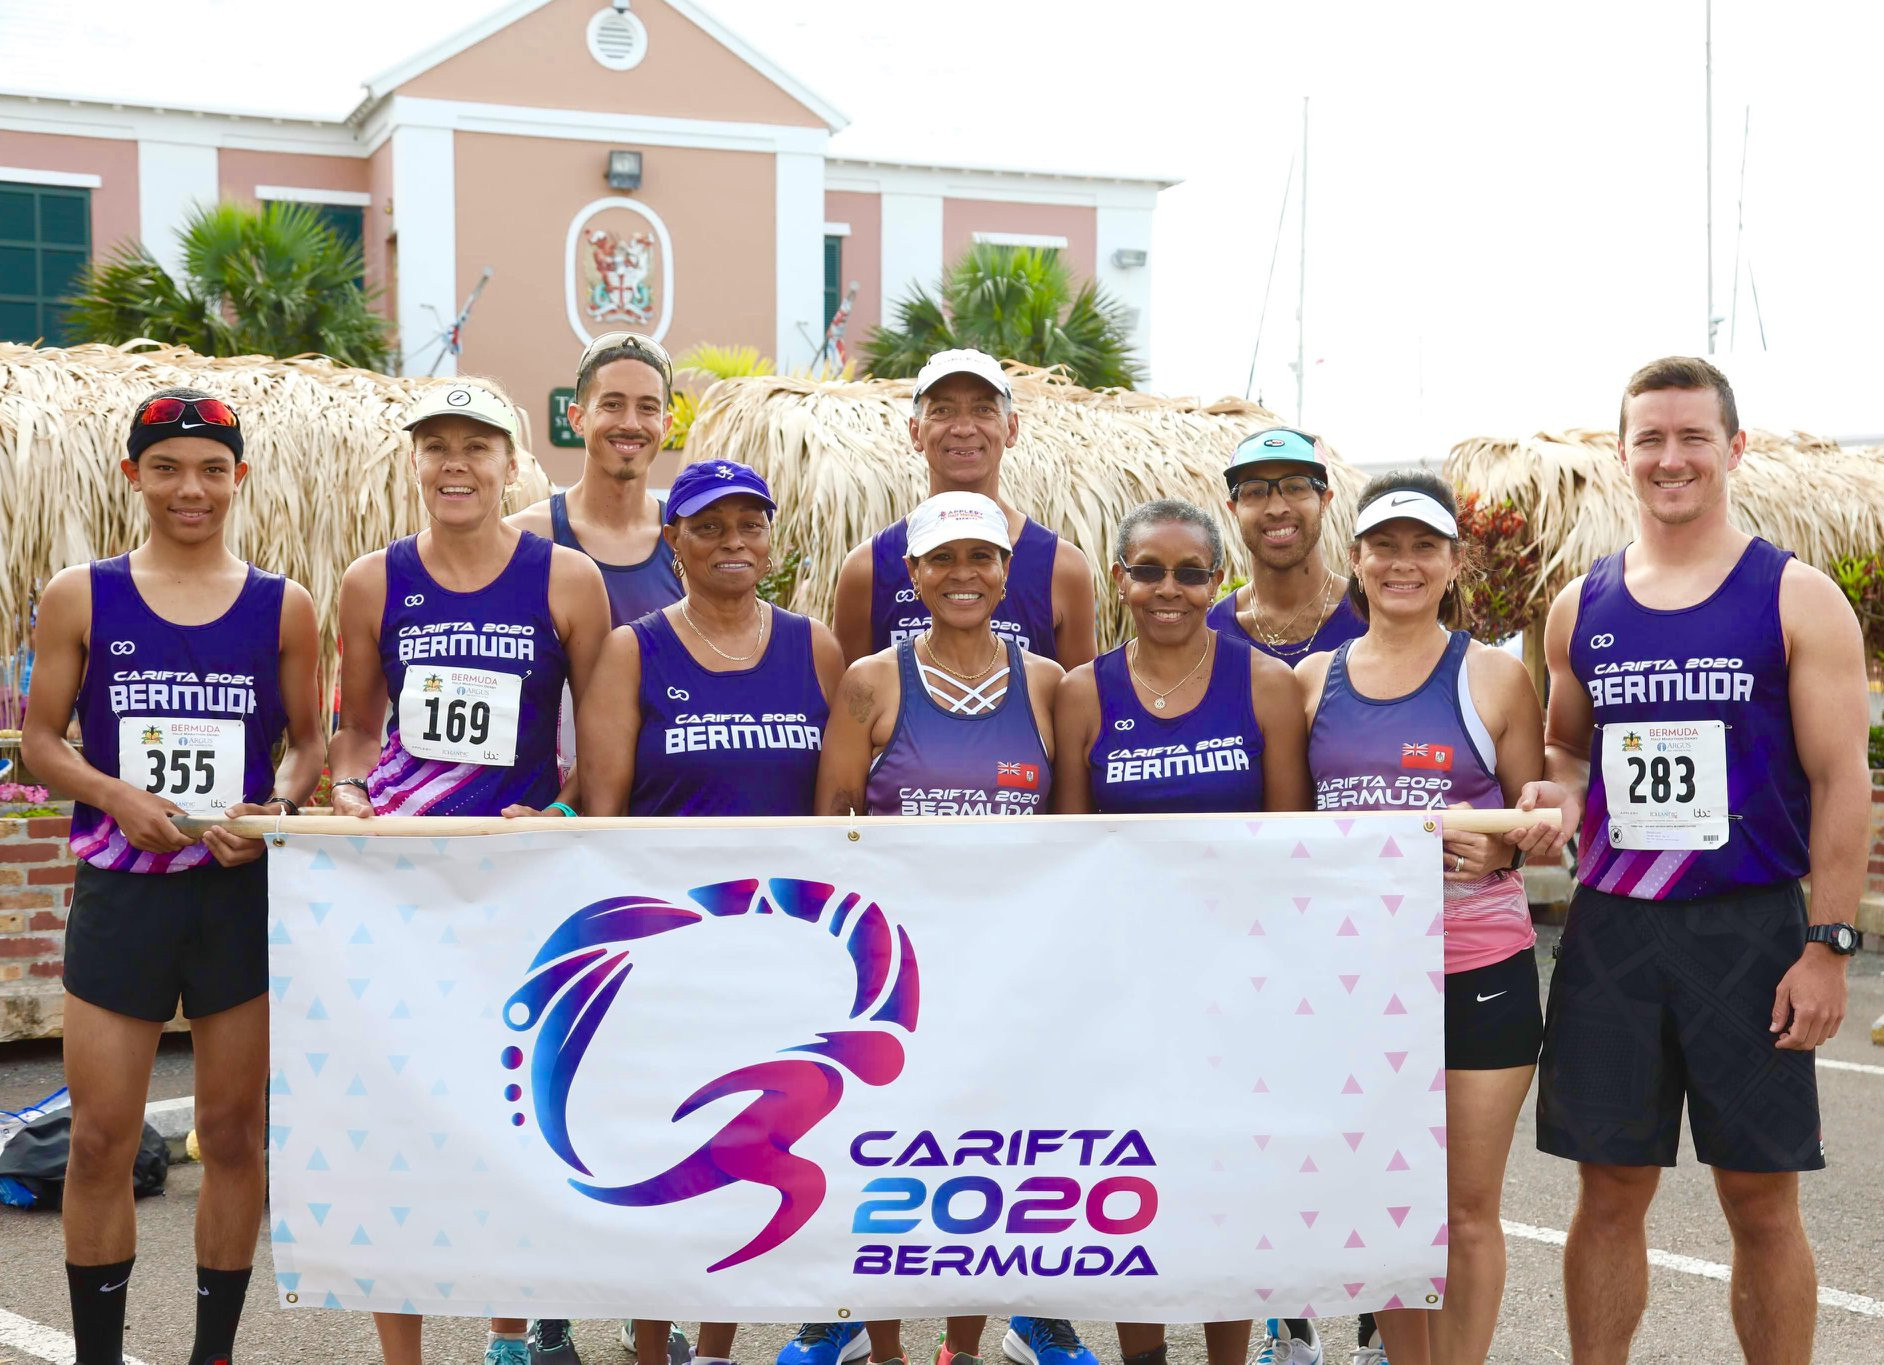 Bermuda had been scheduled to stage the Games in 2020 ©CARIFTA 2020/Facebook